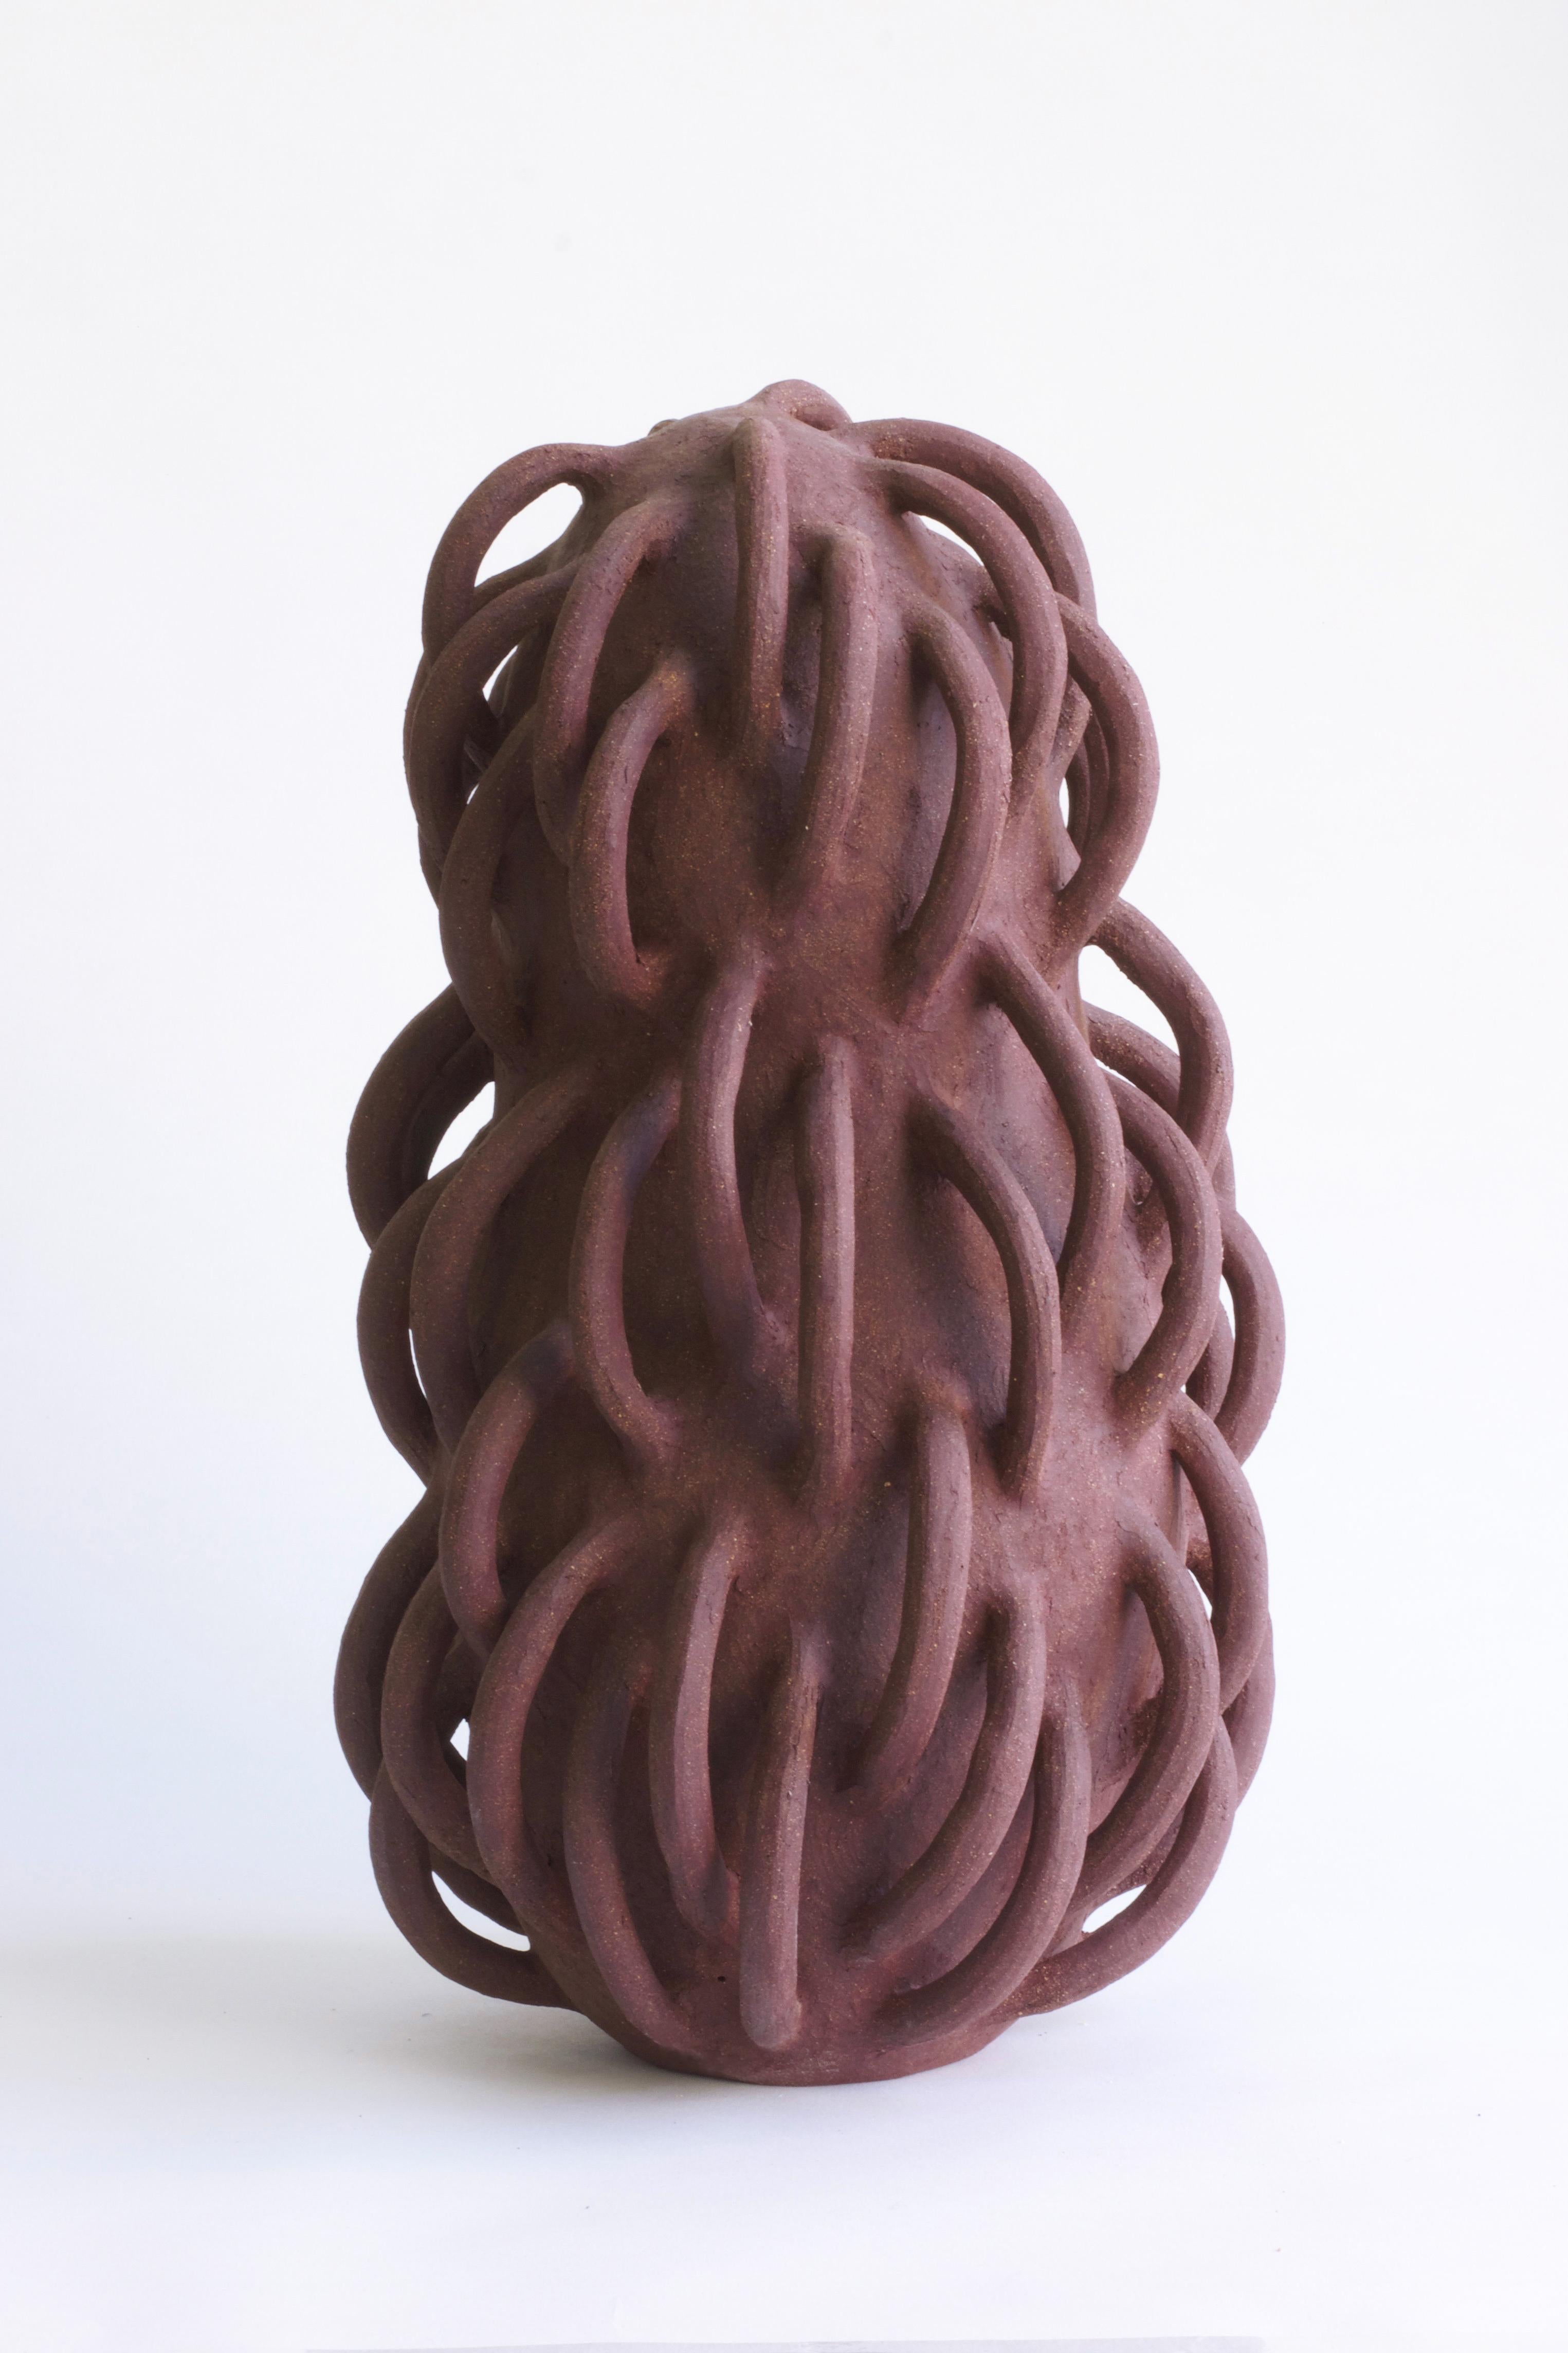 Brutalist ceramic sculpture in deep rust chamotte clay. With its slightly gritty texture and surprising tentacular appendages, this piece is sure to astonish, leaving free range to the imagination. The artist works in stoneware, shaping the clay